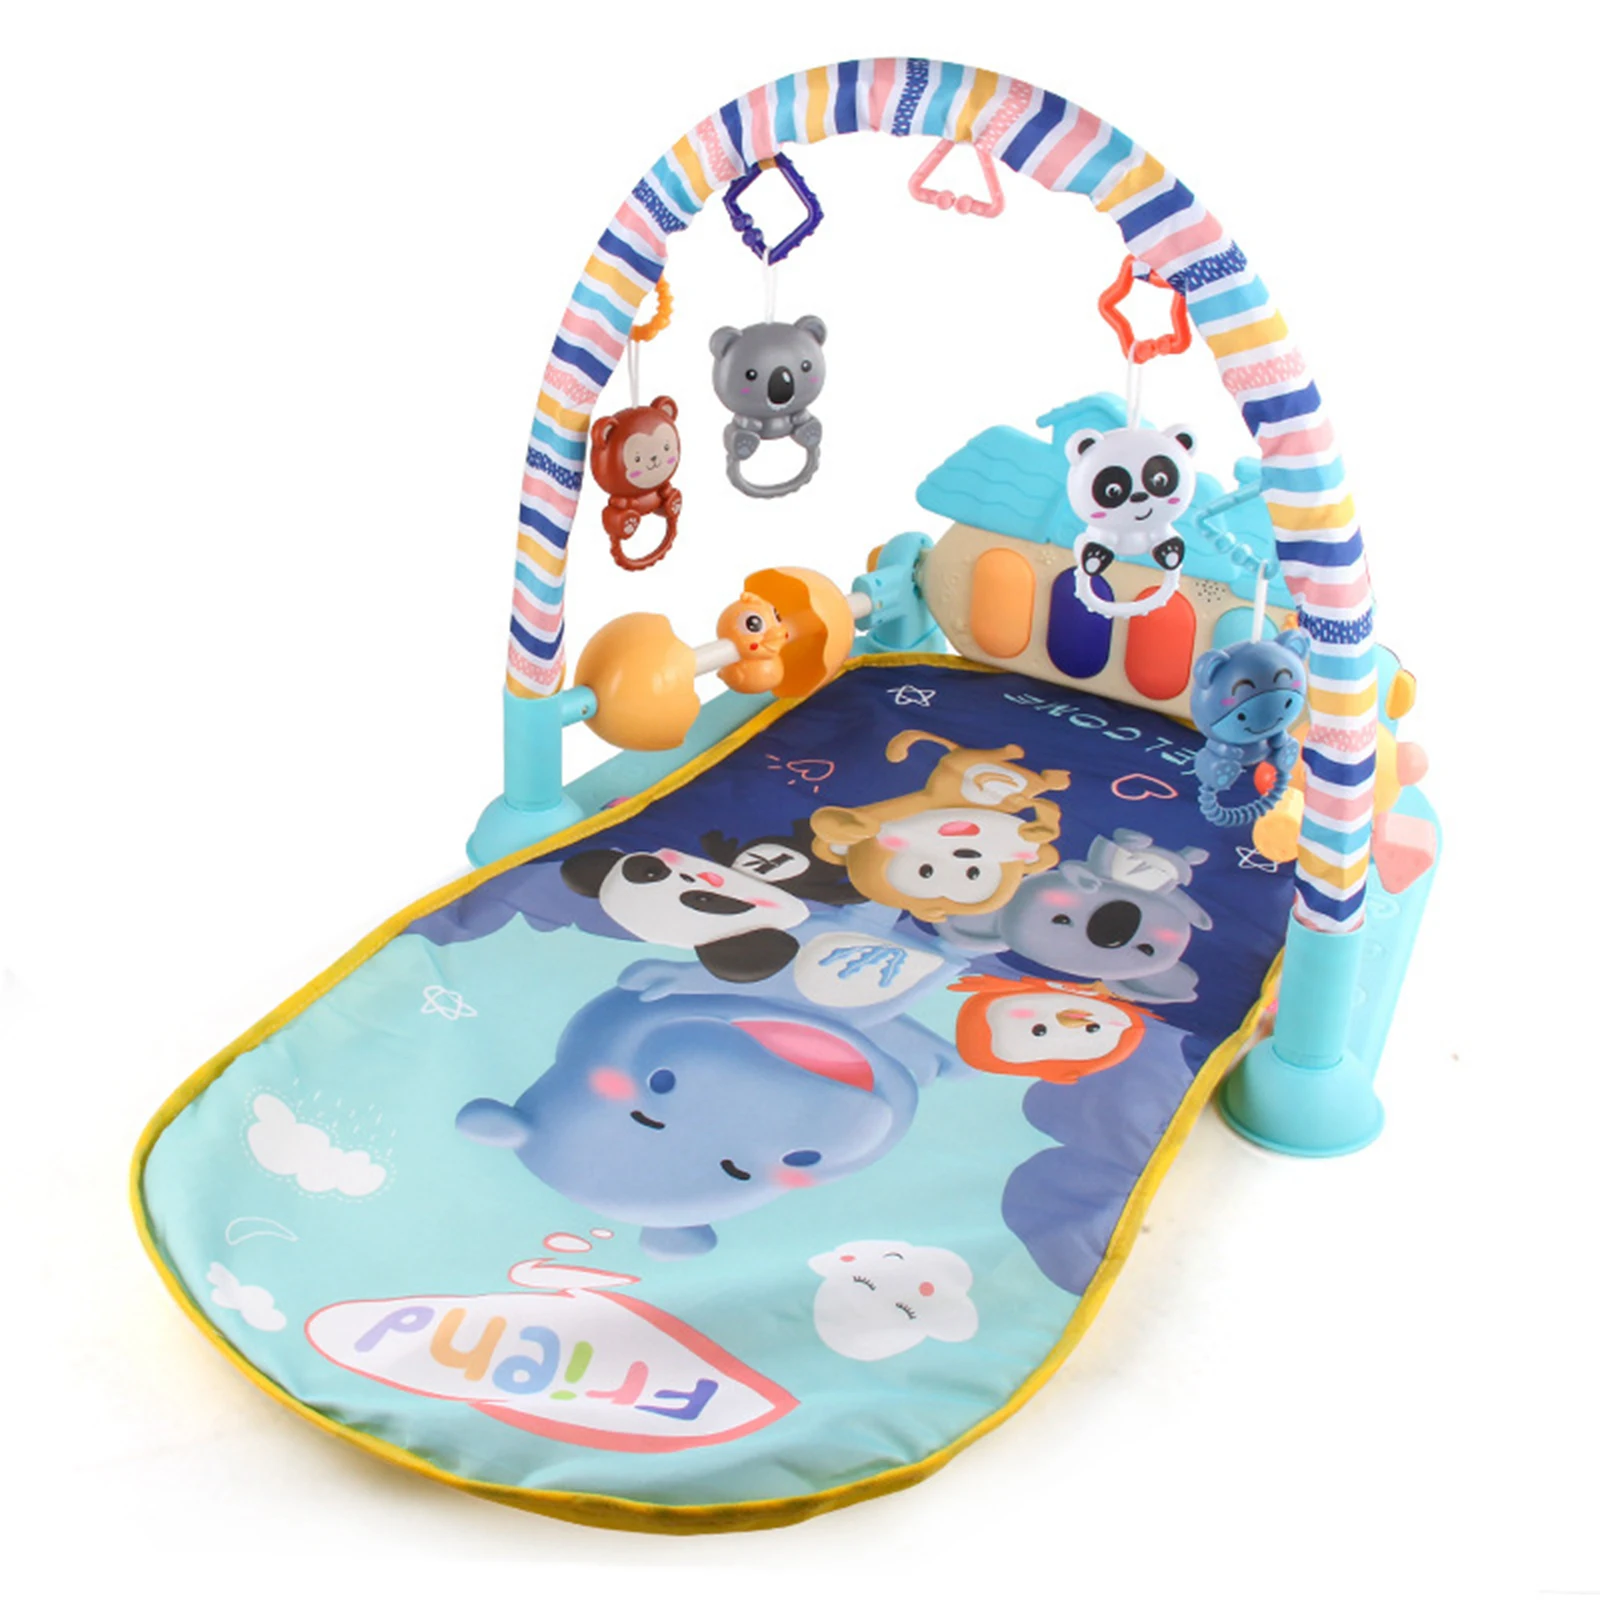 Baby Gym Puzzles Mat Educational Rack Toys Baby Music Play Mat with Piano Keyboard Infant Fitness Carpet Gift for Kids